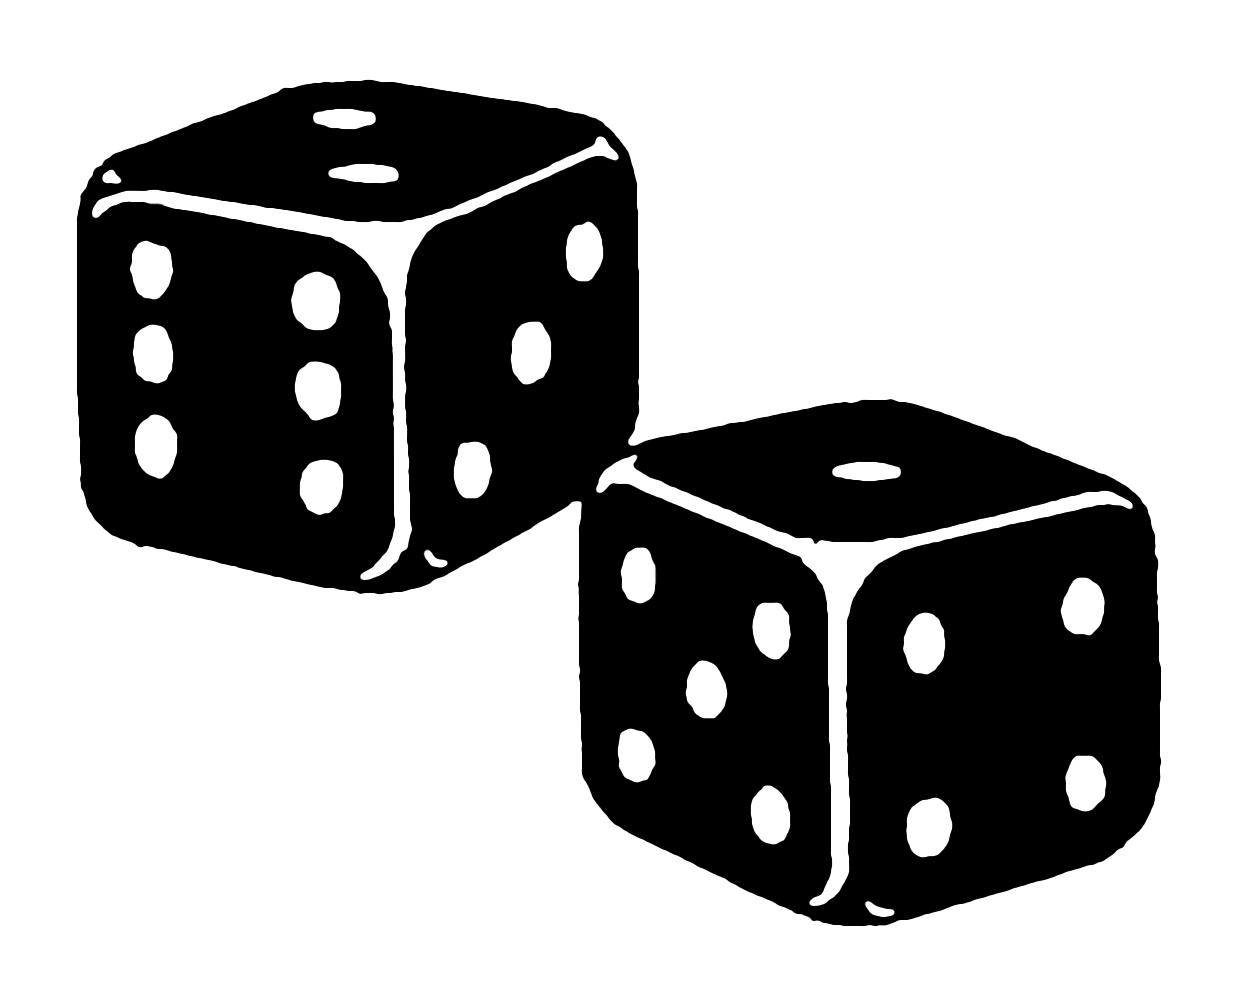 12 Dice Image Free Cliparts That You Can Download To You Computer And    